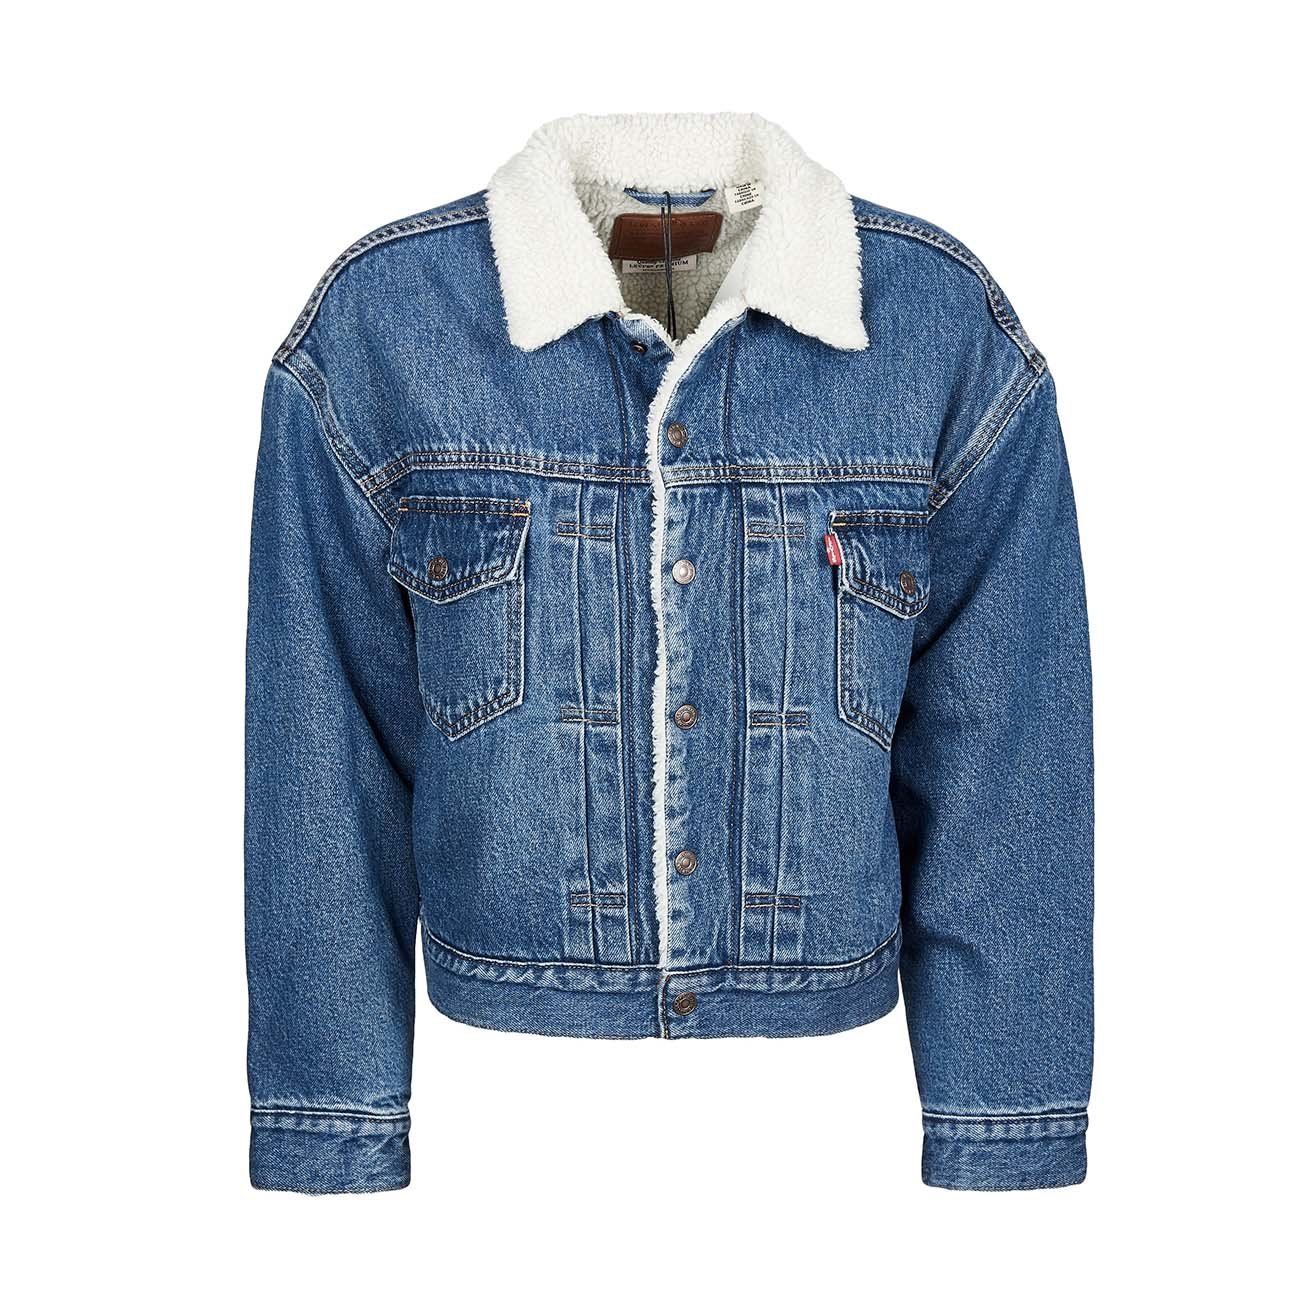 Levi's Brand New Levi Faux Fur Collar Sherpa Jean Jacket Blue Size M - $145  (13% Off Retail) - From Sara